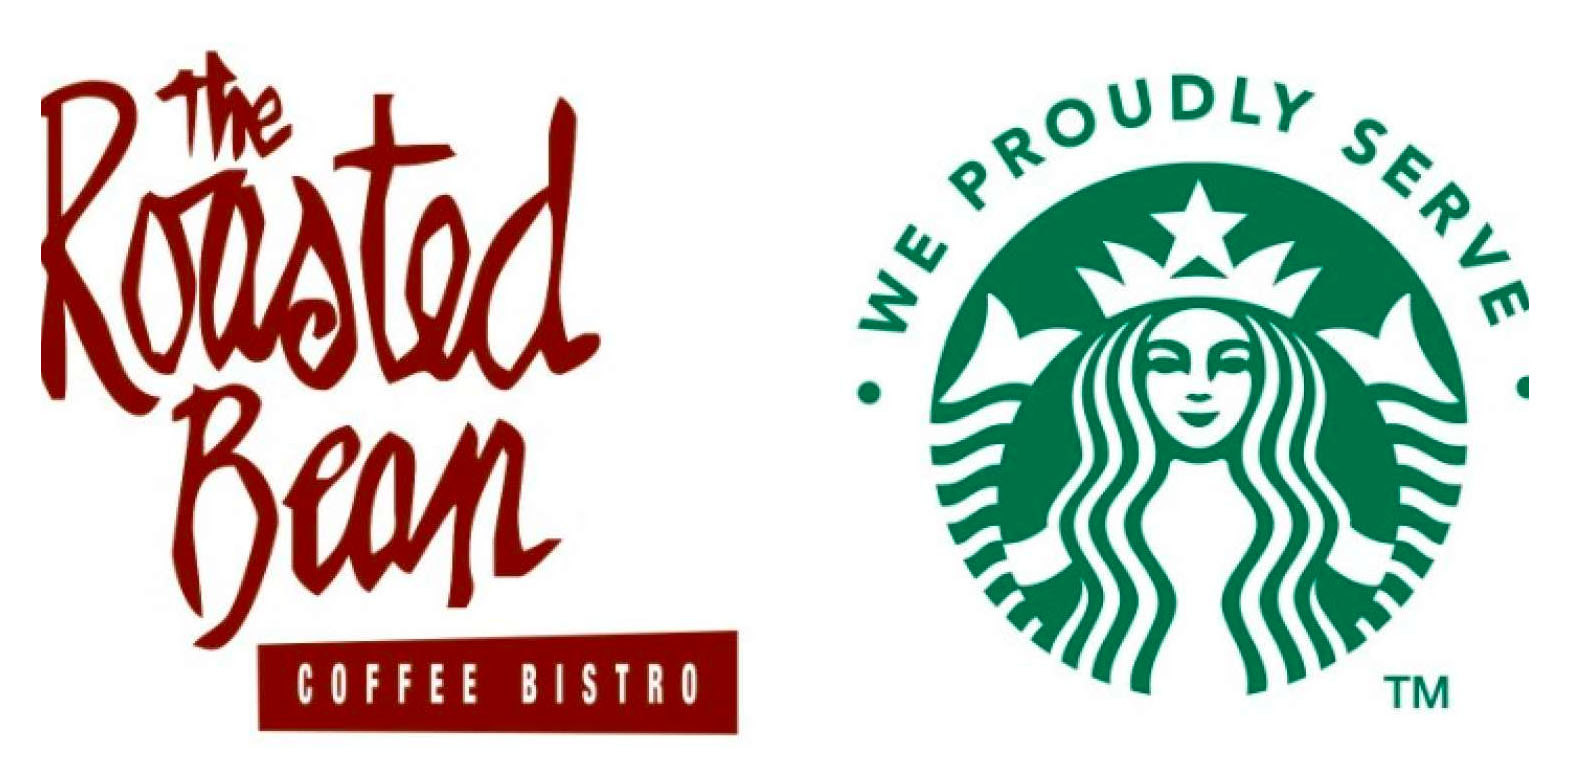 We proudly serve Starbucks at The Roasted Bean.